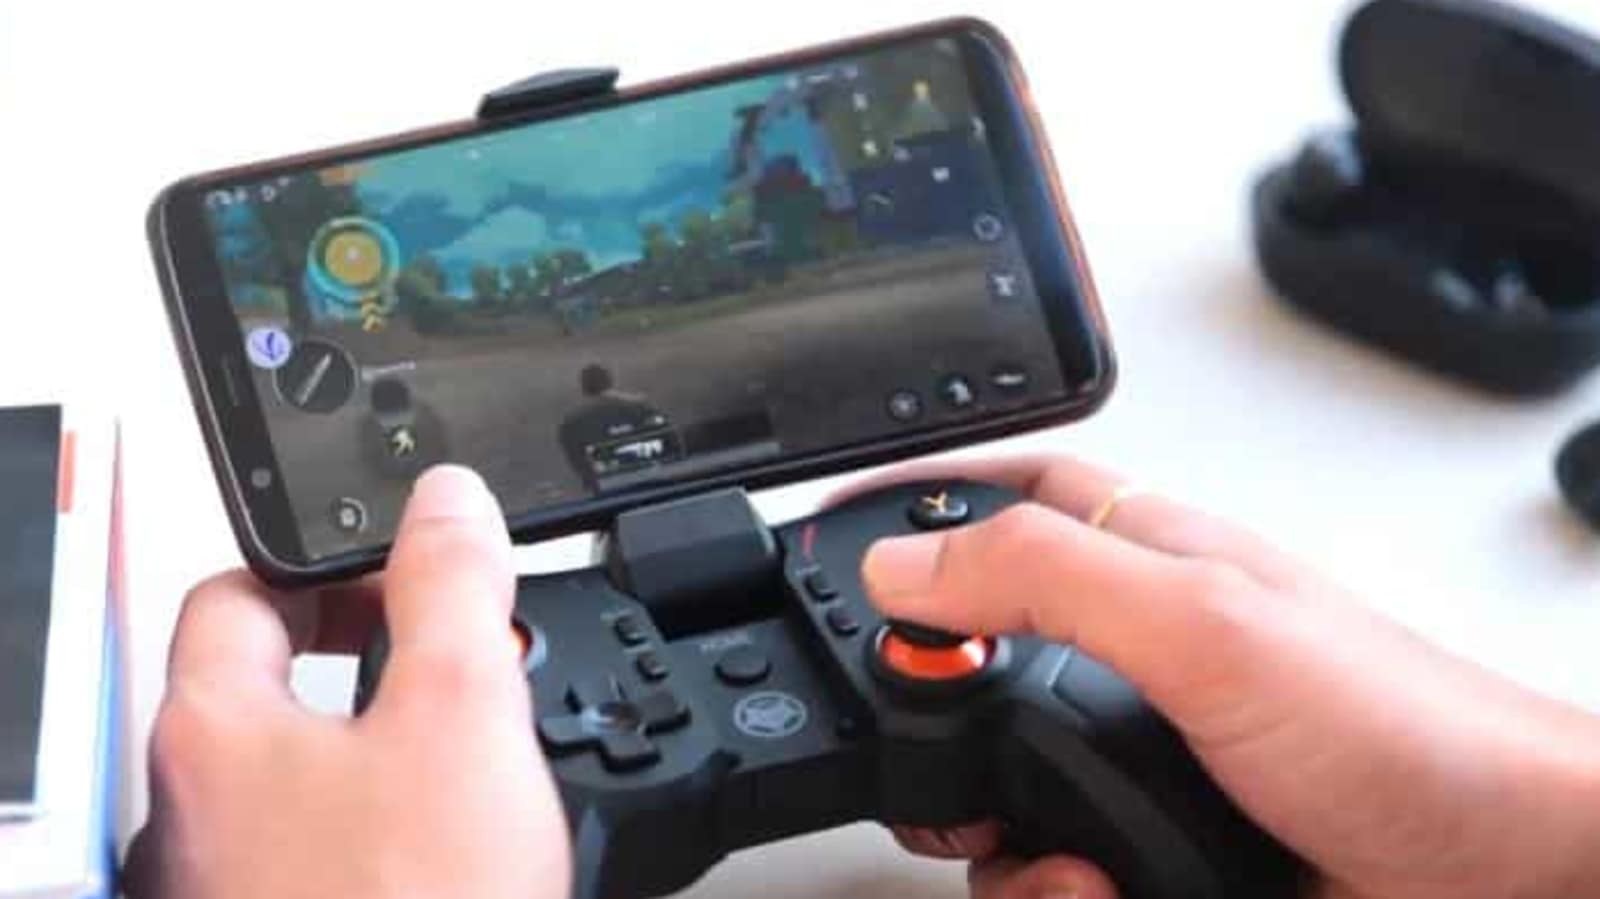 Five months on, no fix in sight for Android 11 controller woes | Gaming ...